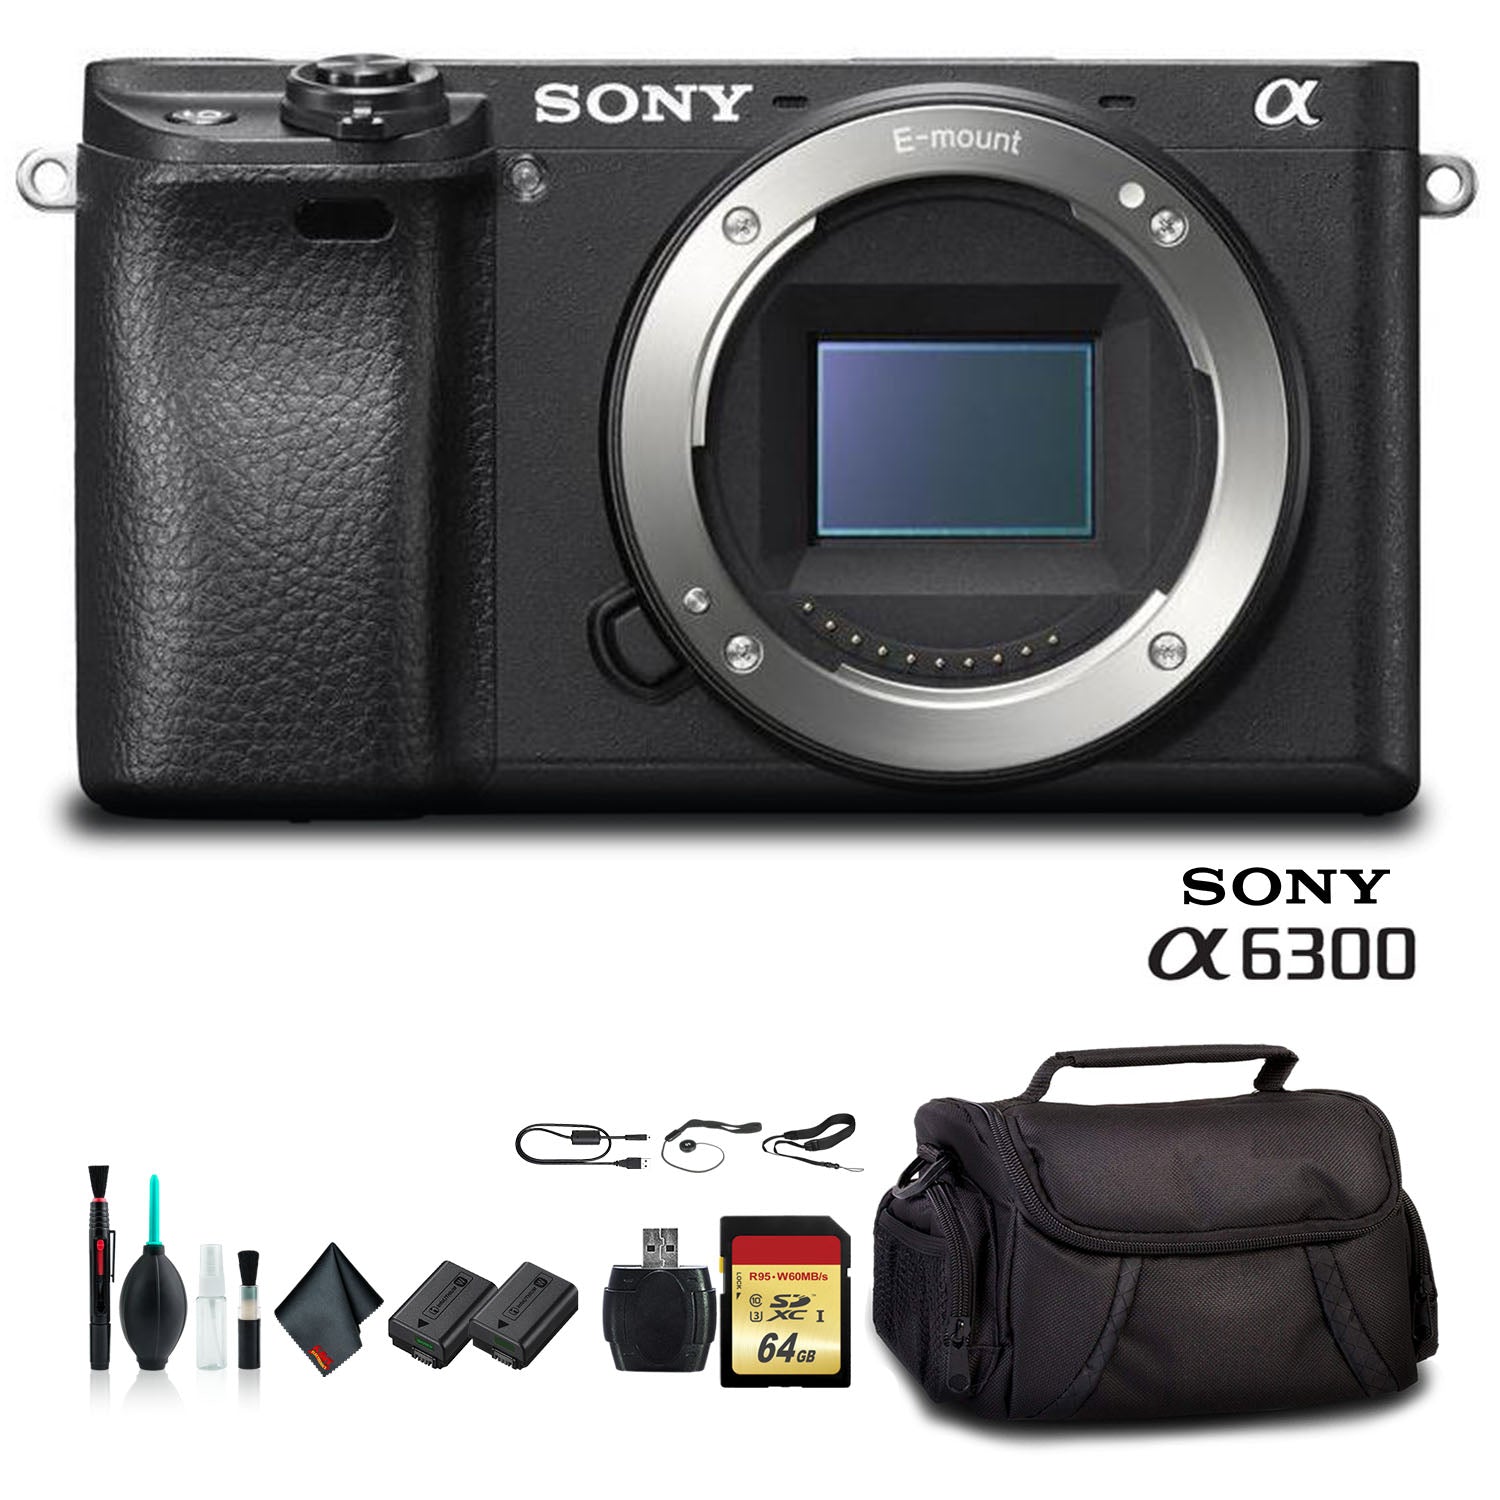 Sony Alpha a6300 Mirrorless Camera Black ILCE6300/B With Soft Bag, Additional Battery, 64GB Memory Card, Card Reader , Plus Essential Accessories